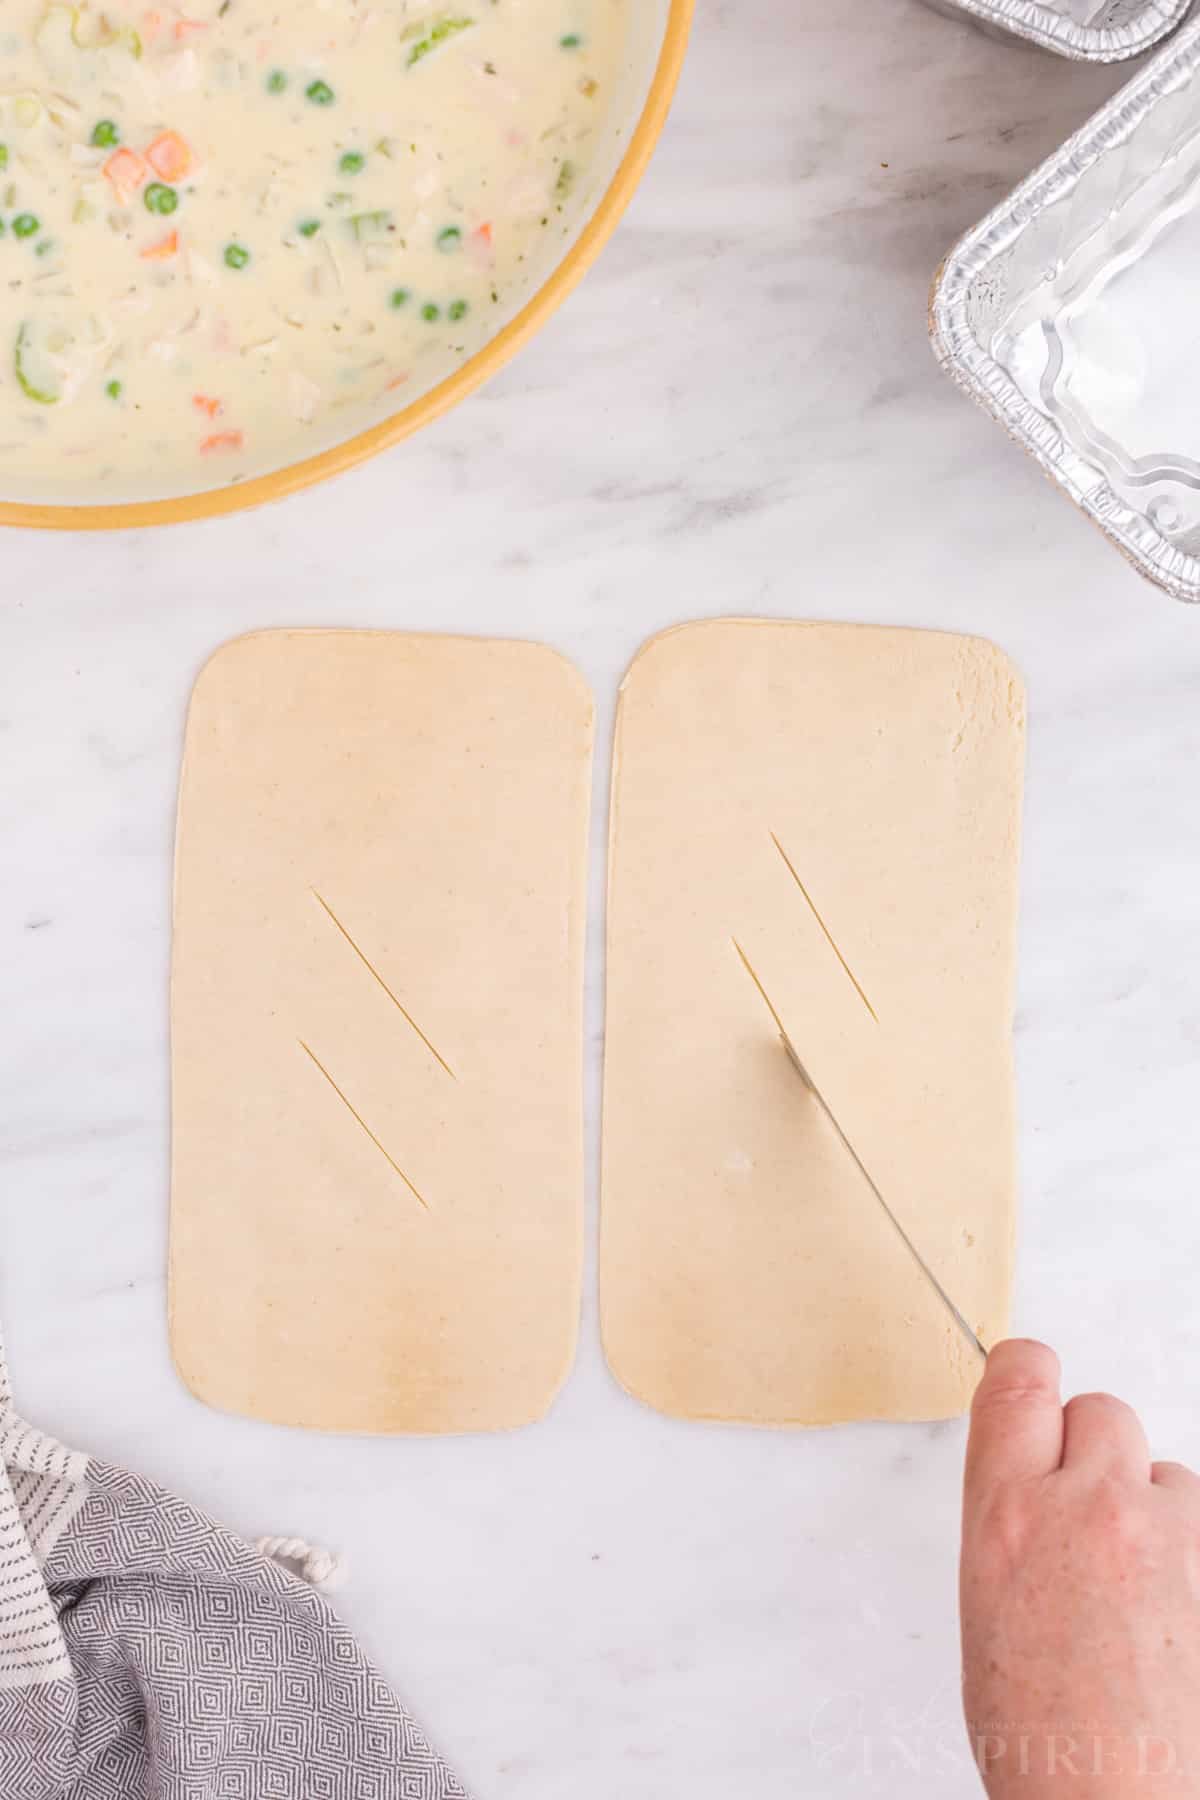 Cut out pie crust tops on a marble countertop, slits made in the crust tops for venting.